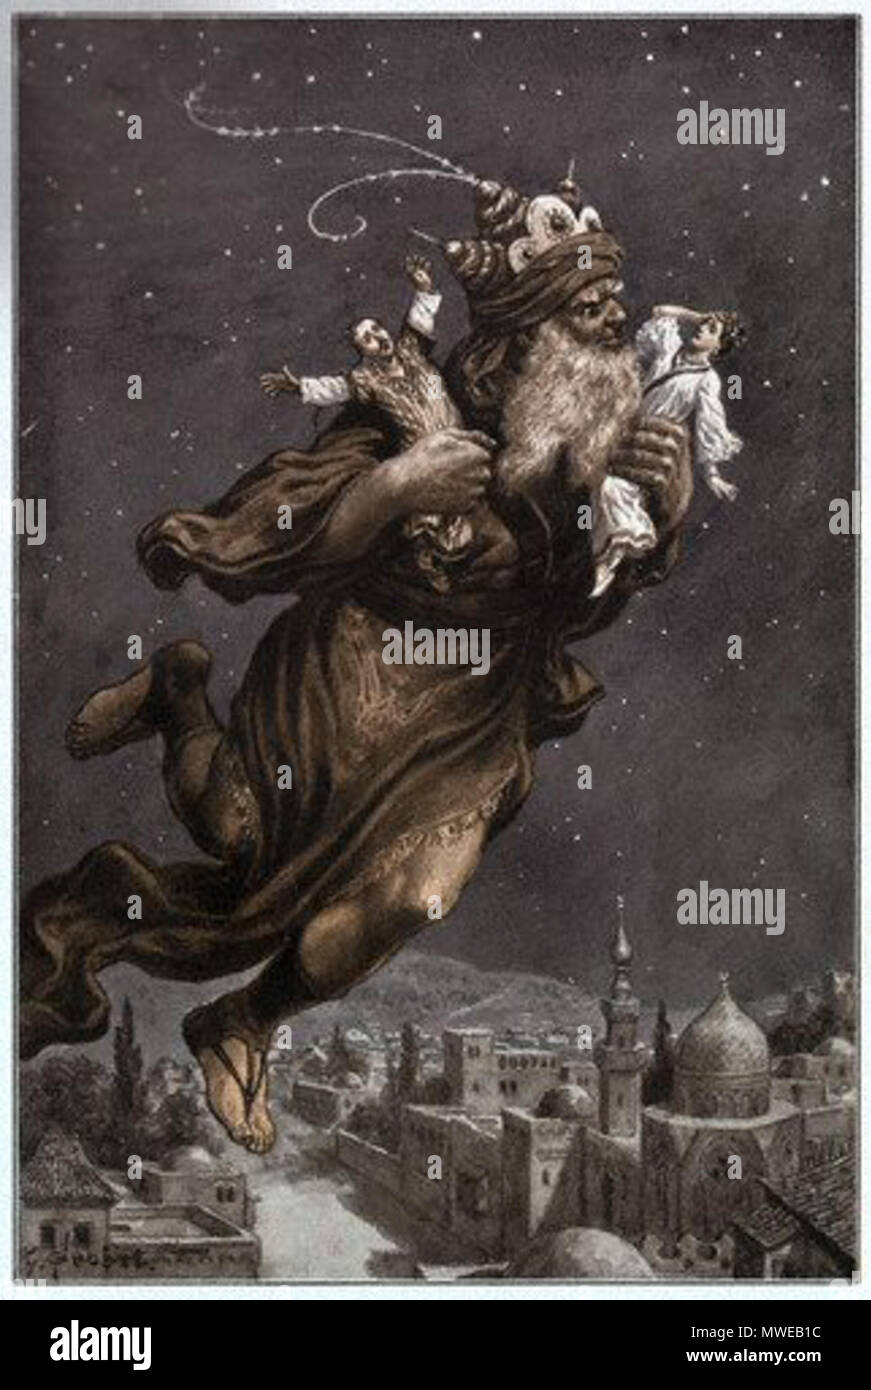 . English: Illustration of Aladdin Flying Away with Two People from the Arabian Nights Stock Photo ID: E3662 Model Released: No Release Property Released: No Release Date Created: ca. 1900 Credit: © Bettmann/CORBIS License Type: Rights Managed (RM) Category: Historical Collection: Bettmann Max File Size: 38 MB - 4527px × 3041px • 15.00in. × 10.00in @ 300 pp . 1900. Unknown 293 Illustration of Aladdin Flying Away with Two People from the Arabian Nights Stock Photo